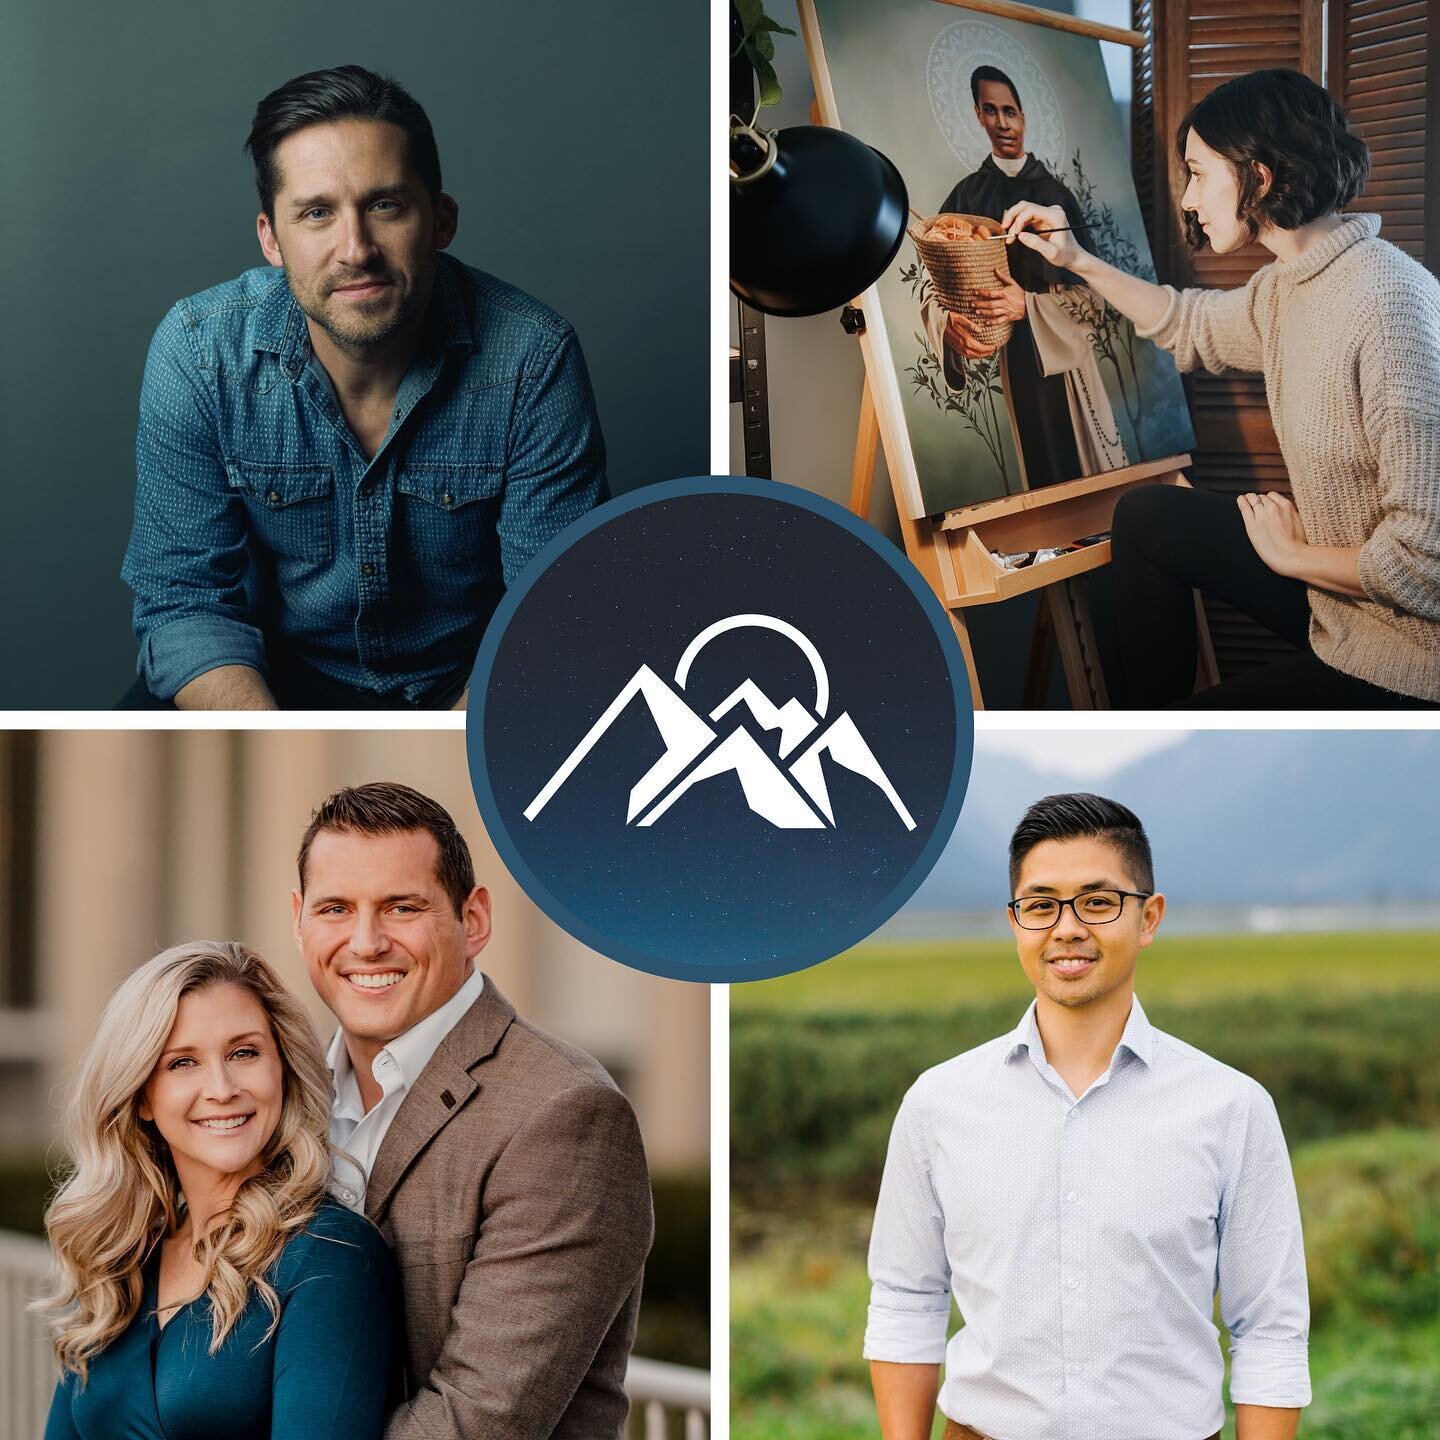 Here are our guests for May 2023!

May 7: Josh Blakesley
May 14: Tianna Williams
May 21: Andrew and Sarah Swafford 
May 28: Eric Chow

AND don&rsquo;t miss our Saturday Night Live vocation special with Sr. Bethany, FSP on May 20 at 9 pm EST! 

Yes Ca